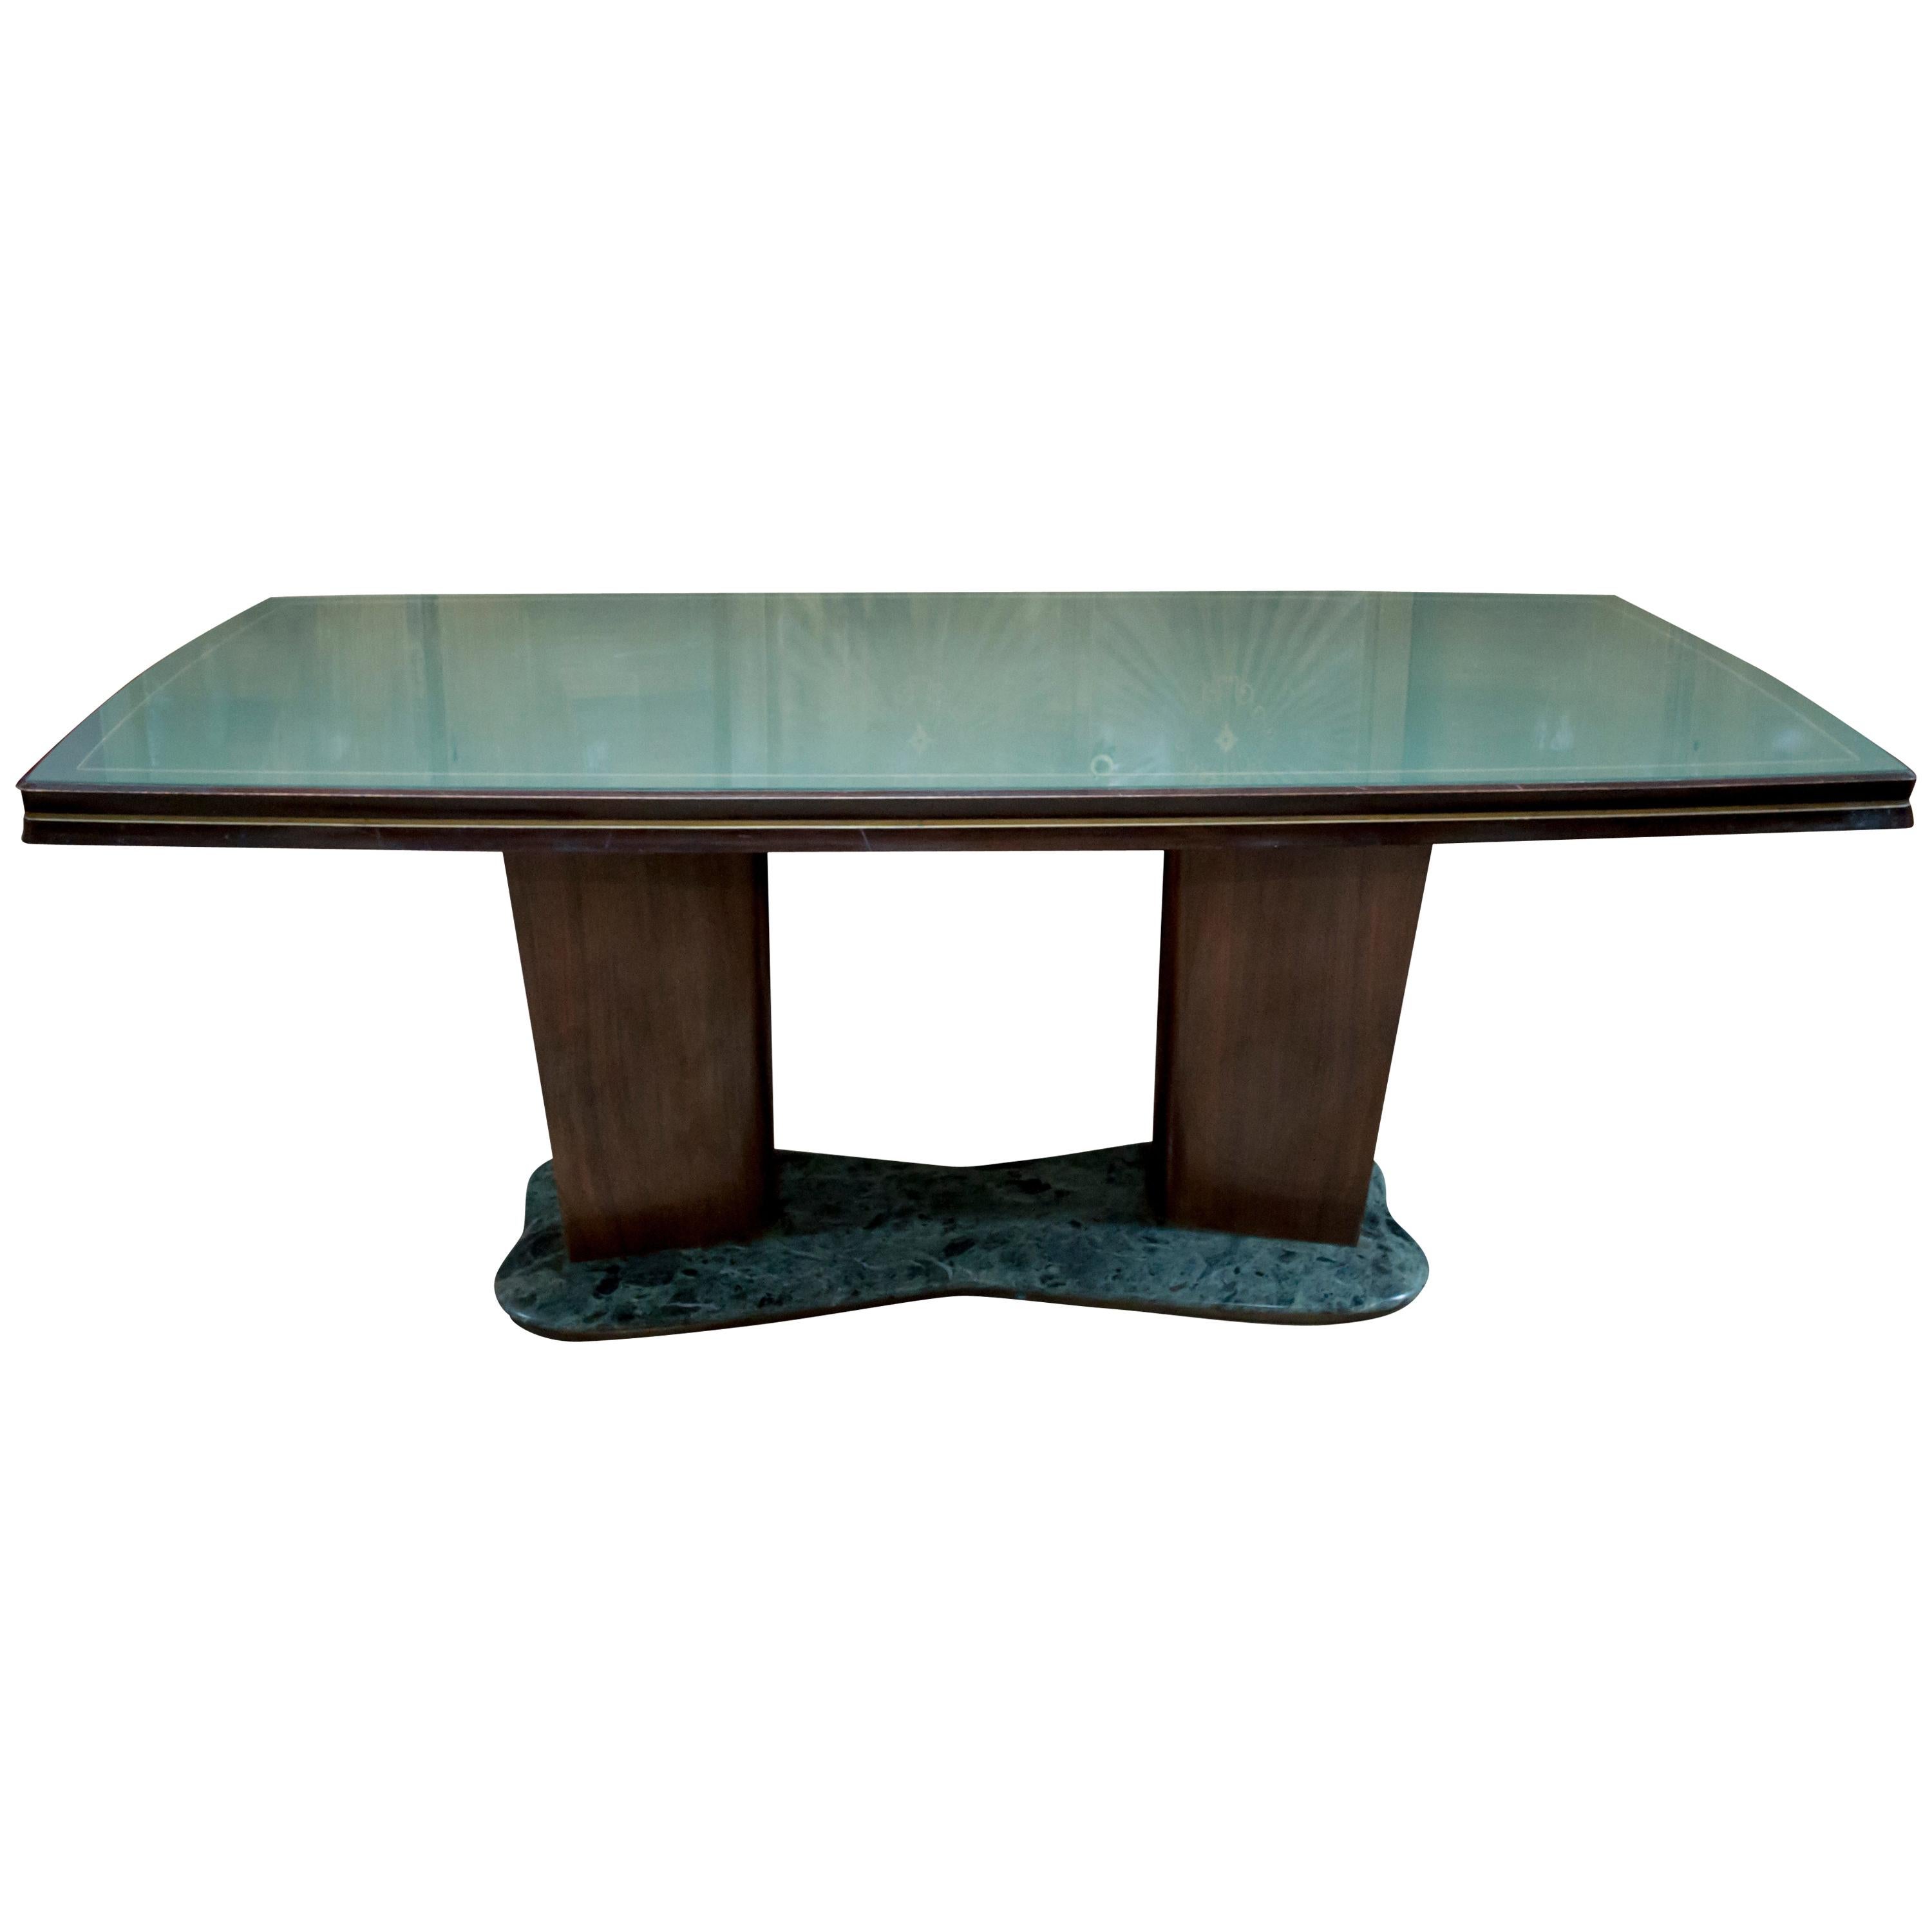 Vittorio Dassi Midcentury Italian Glass and Marble Dining Table, 1950s